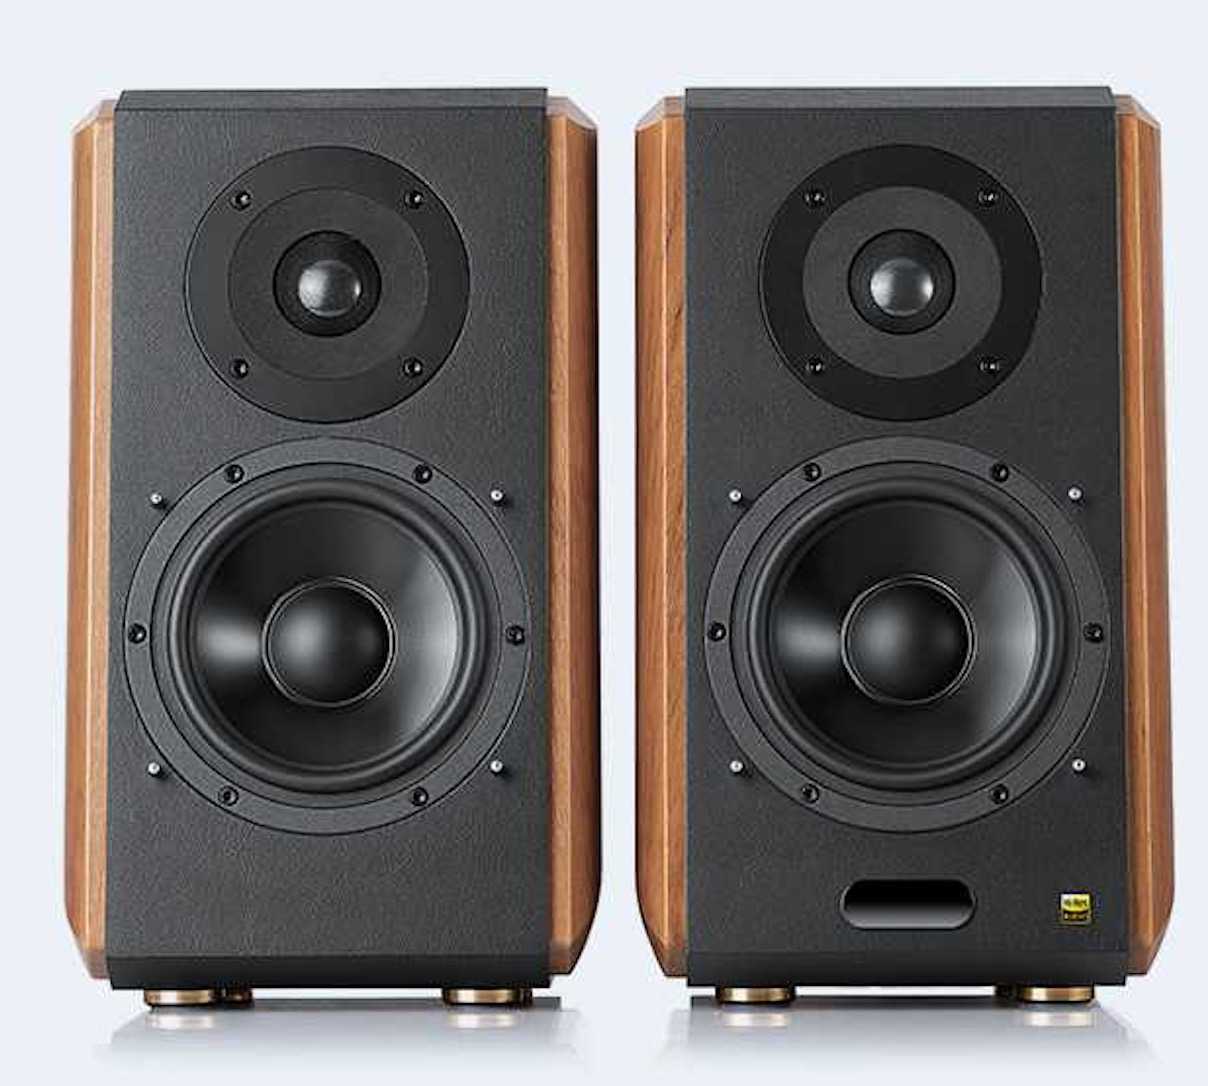 S1000W Powered Speakers From Edifier